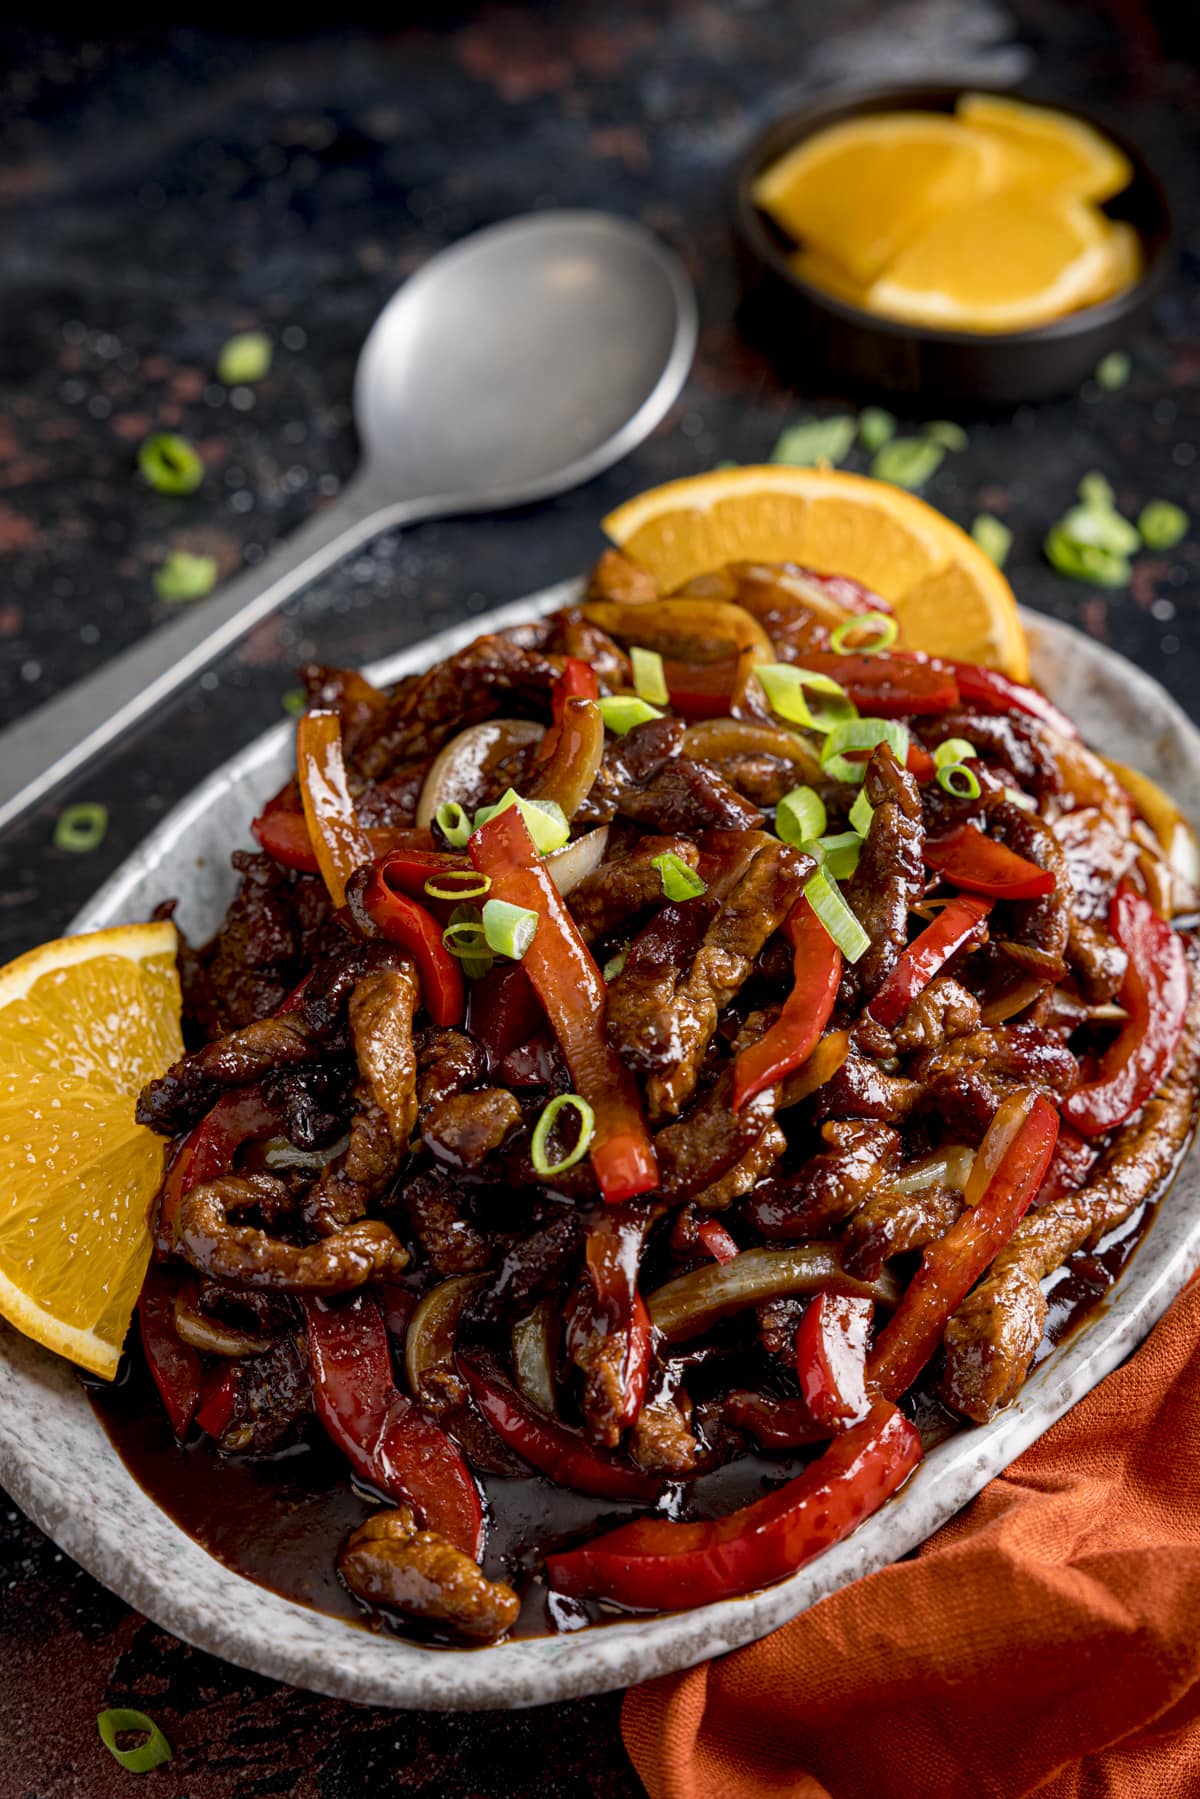 Crispy orange beef with peppers and onions on a flat oval plate.  There are slices of orange and spring onion scattered around and a spoon in the background.